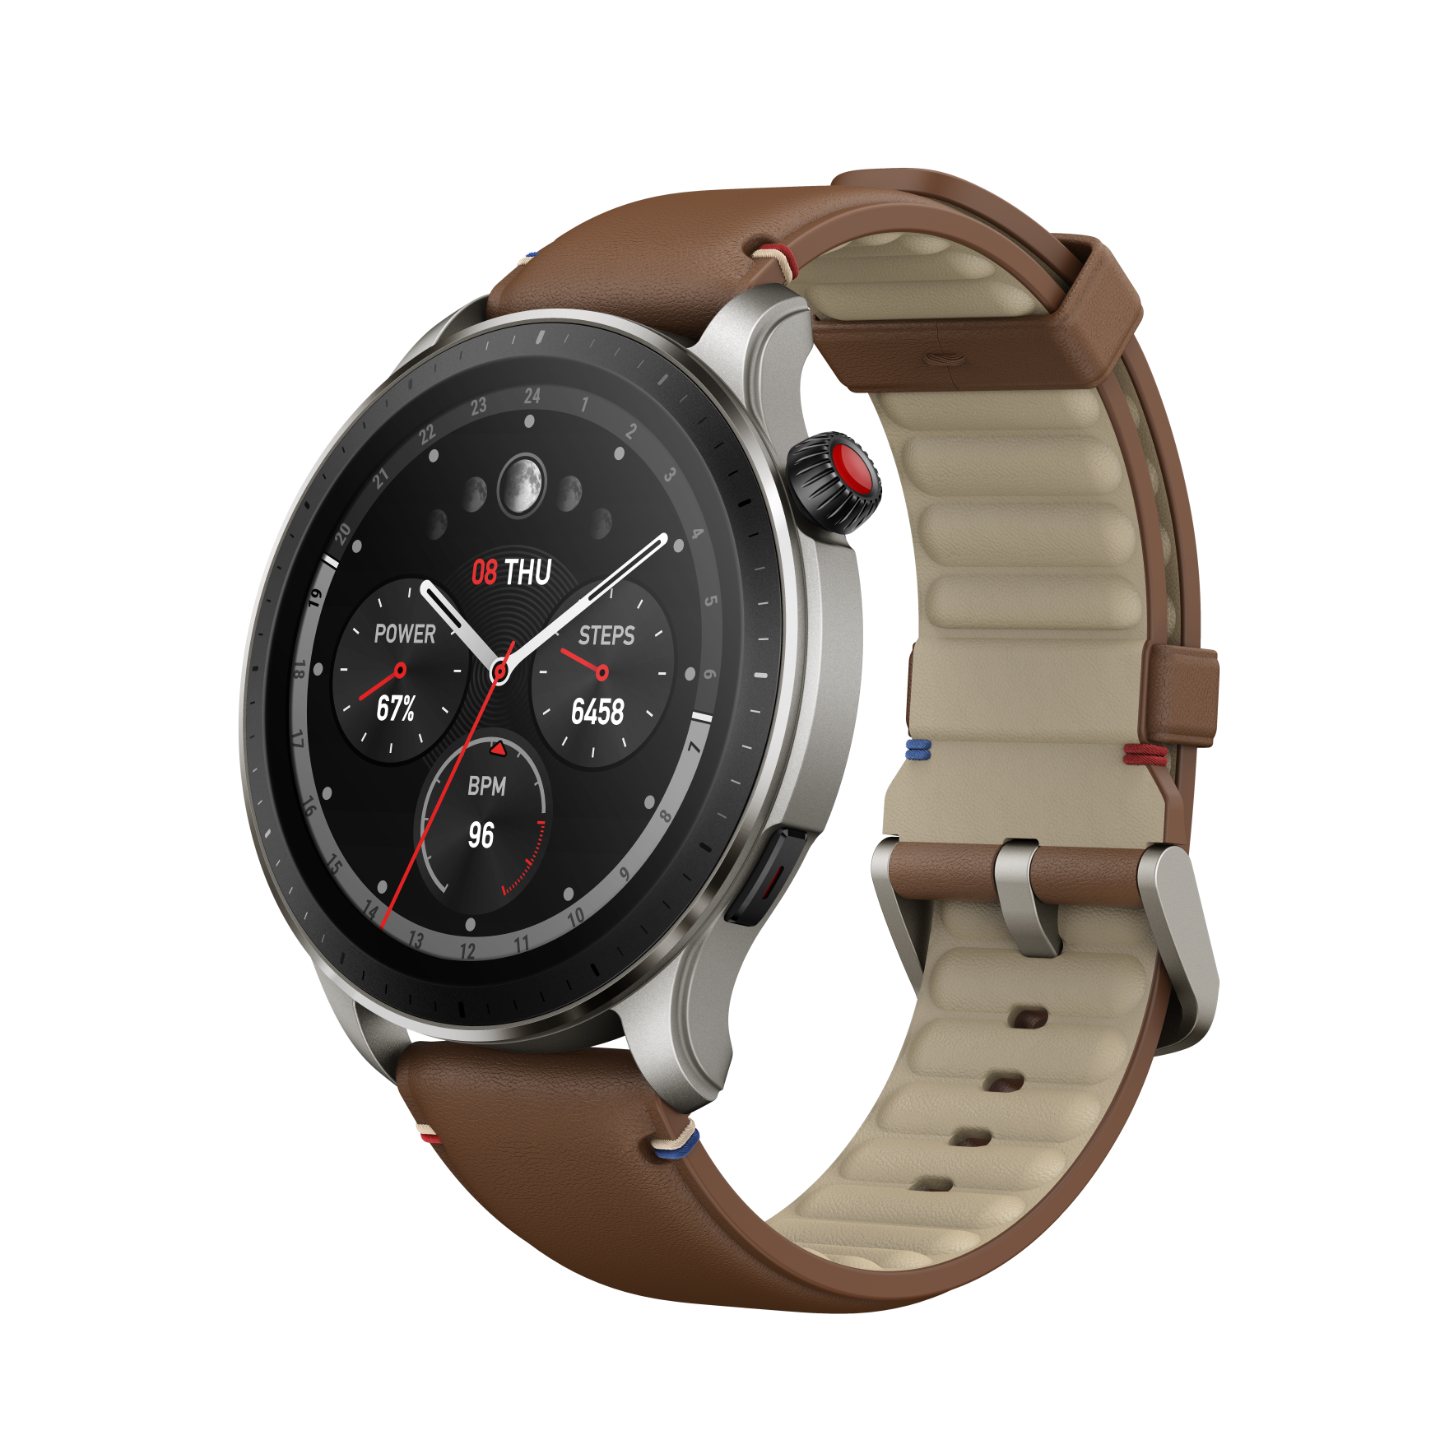 Amazfit GTS 4 Mini presented in Europe for €99.99 as a cheaper